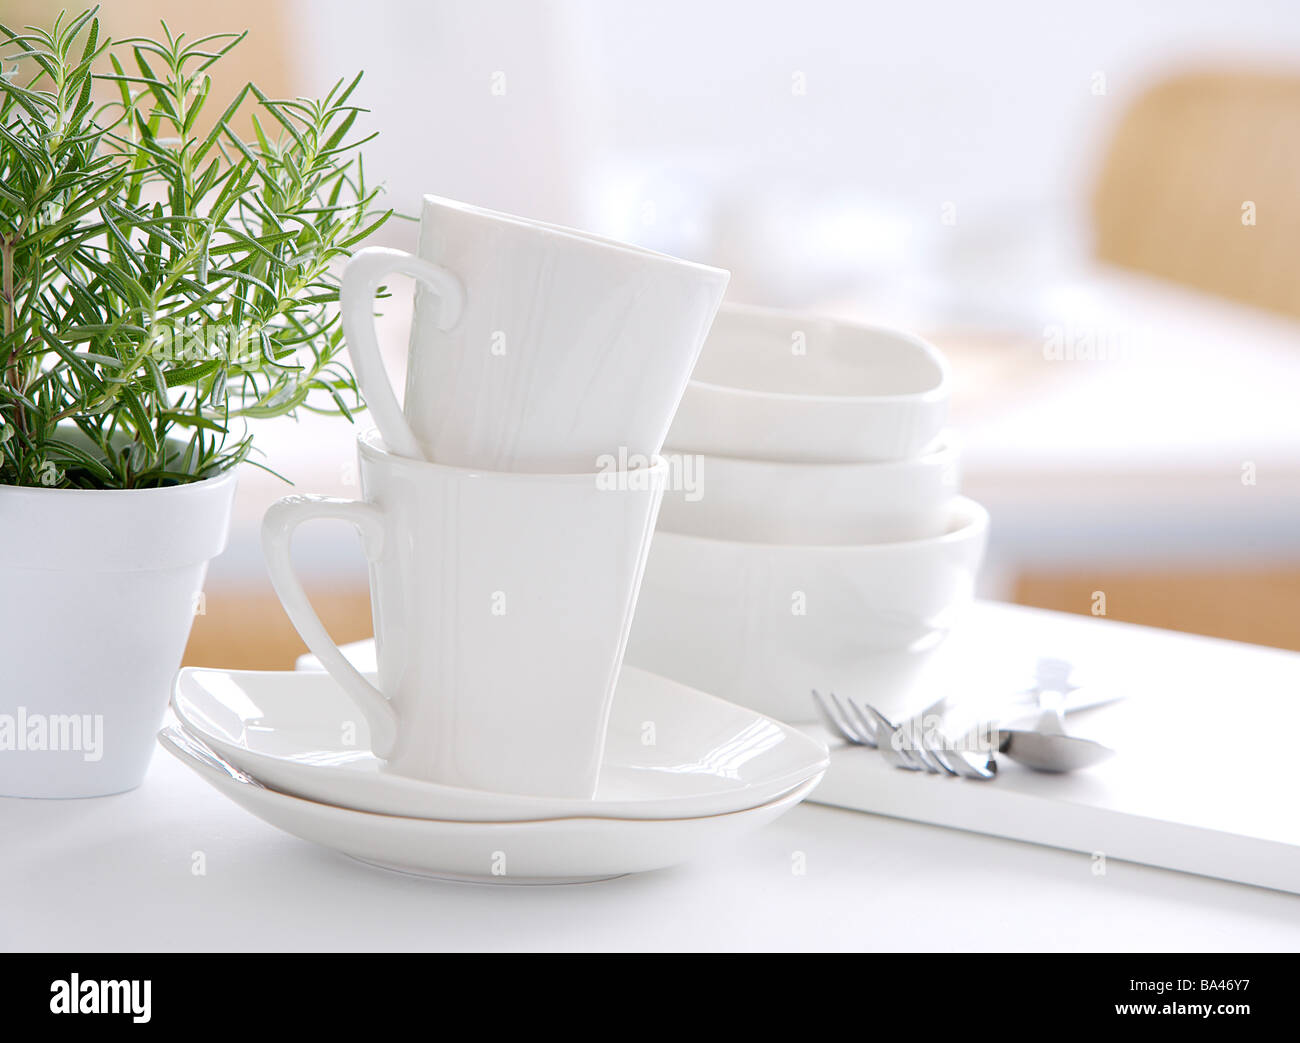 Close up of tea sets and tablewear Stock Photo